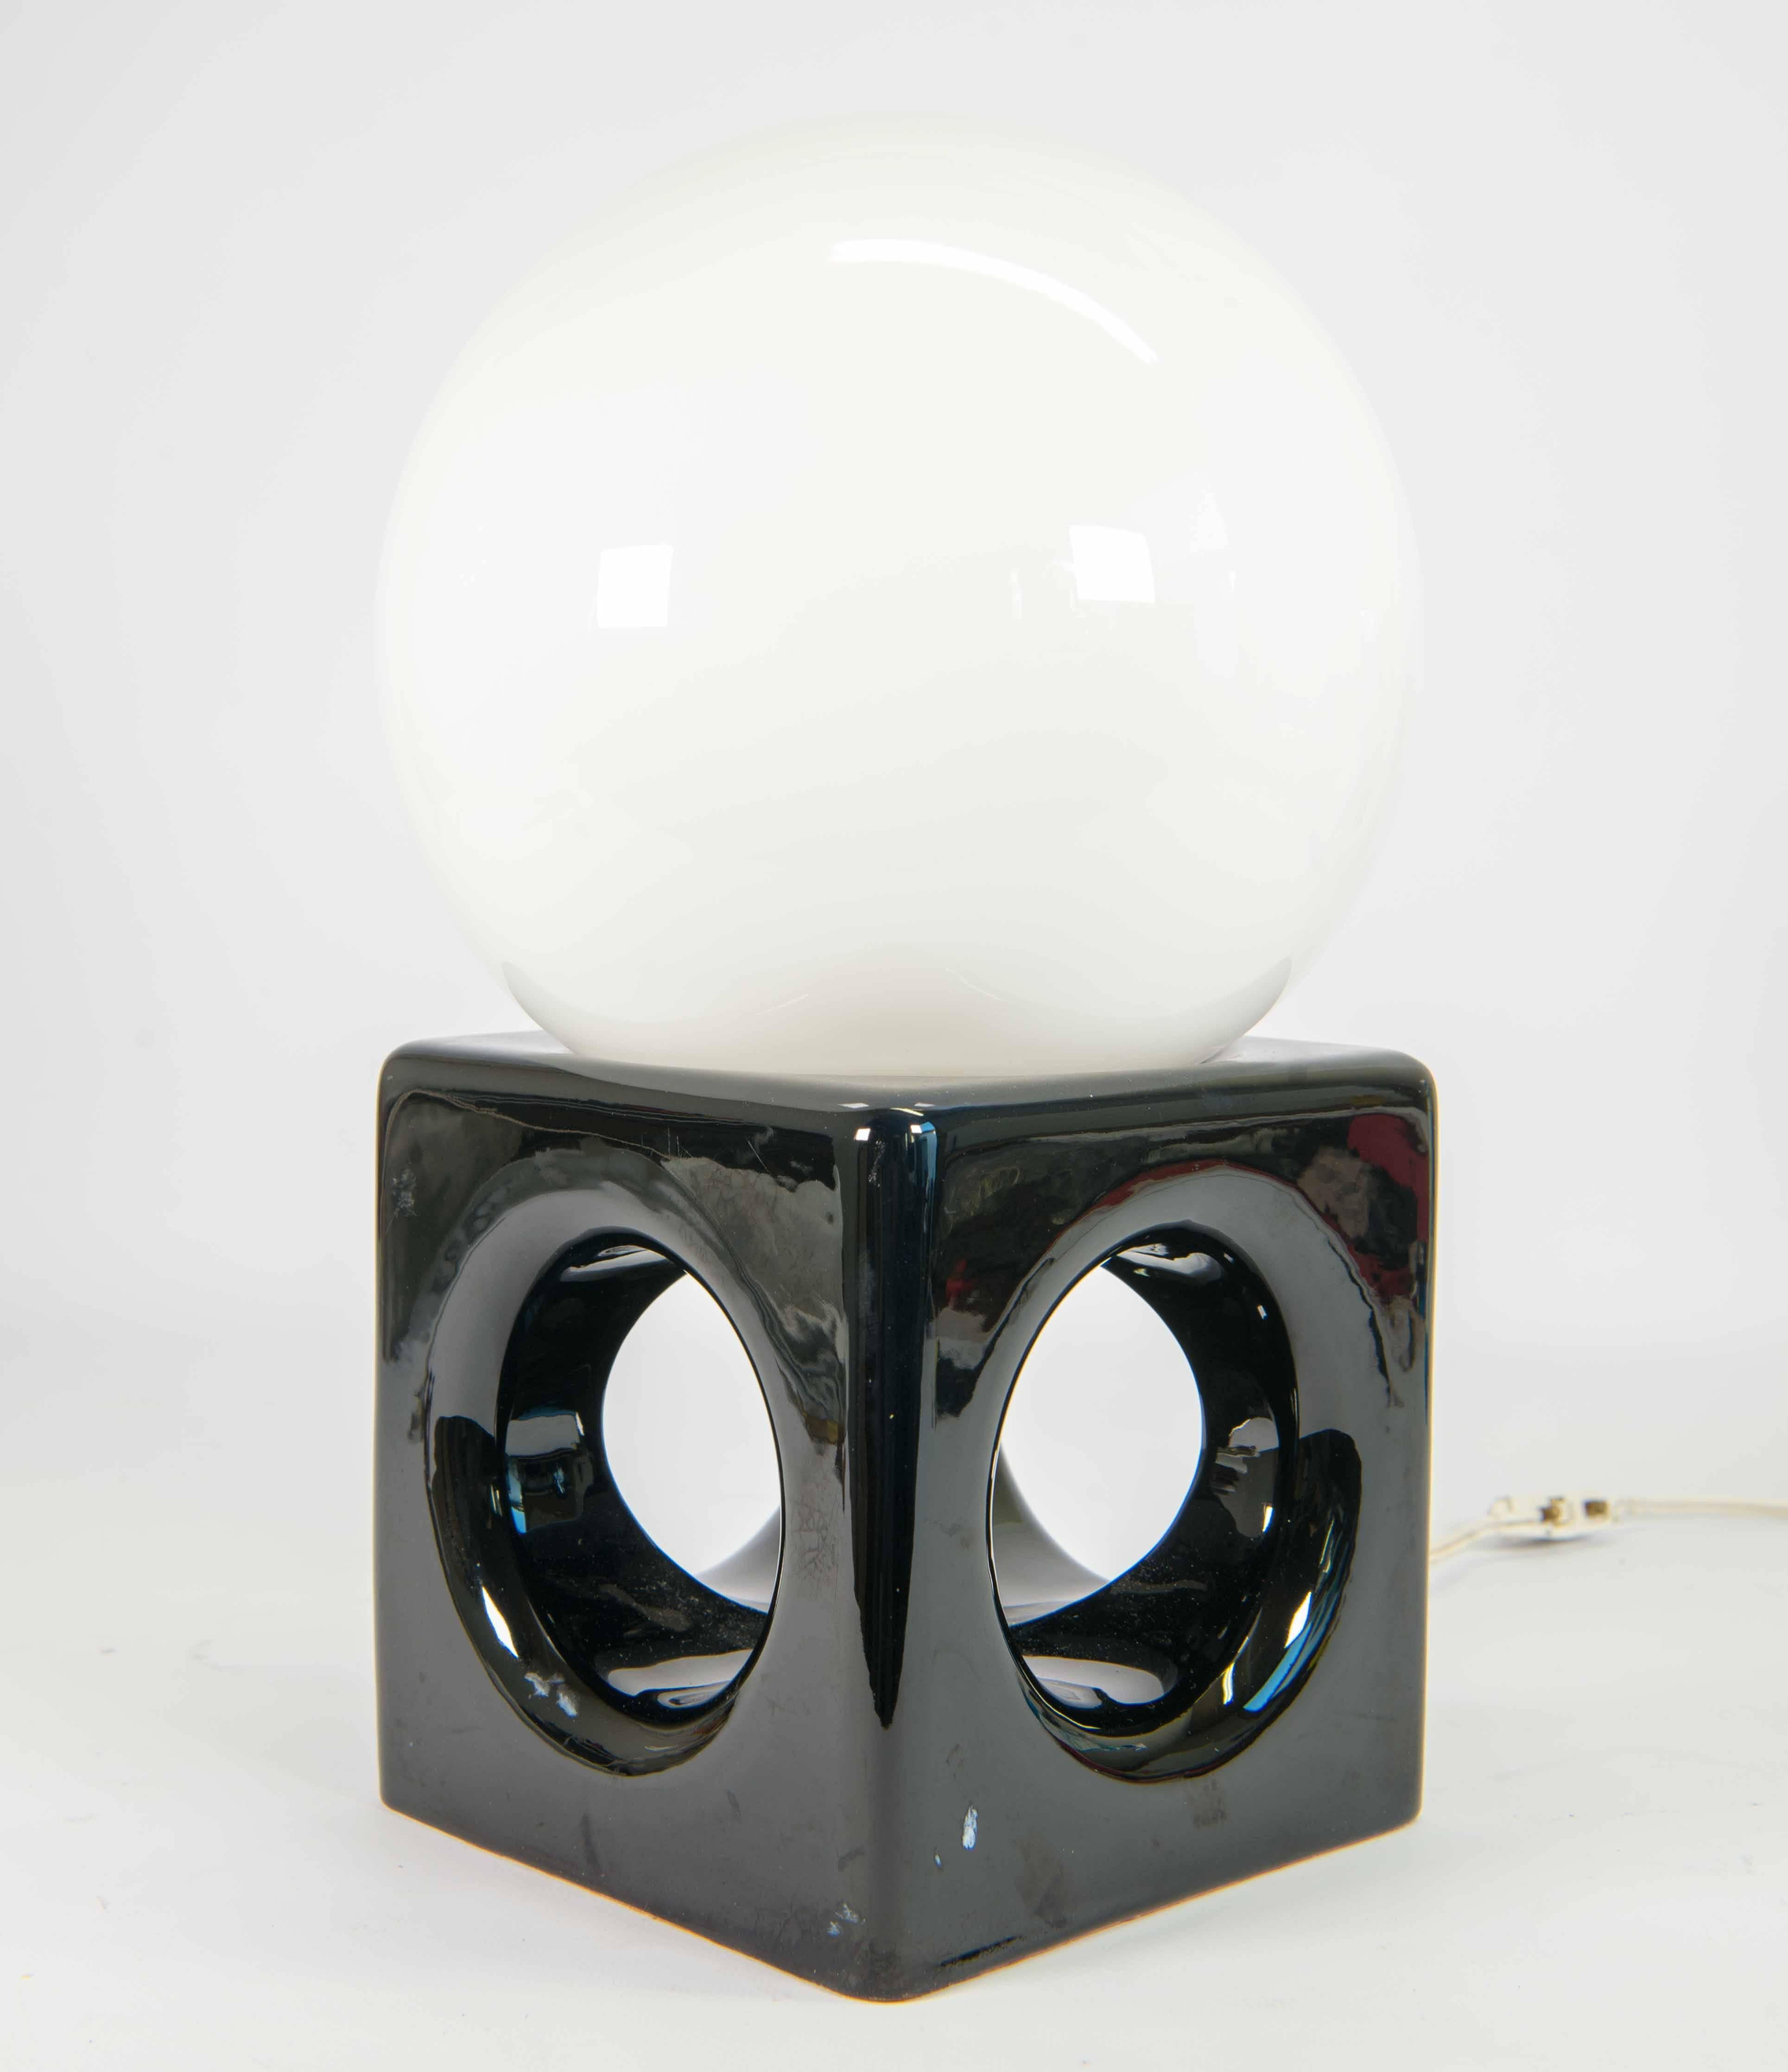 Table lamp with porcelain base in black color holding a white sphere. The sphere is made of frosted glass.
Lamp was most likely made circa 1950 in Belgium.
It is unmarked. European wires are present, yet these can be changed to US wiring on